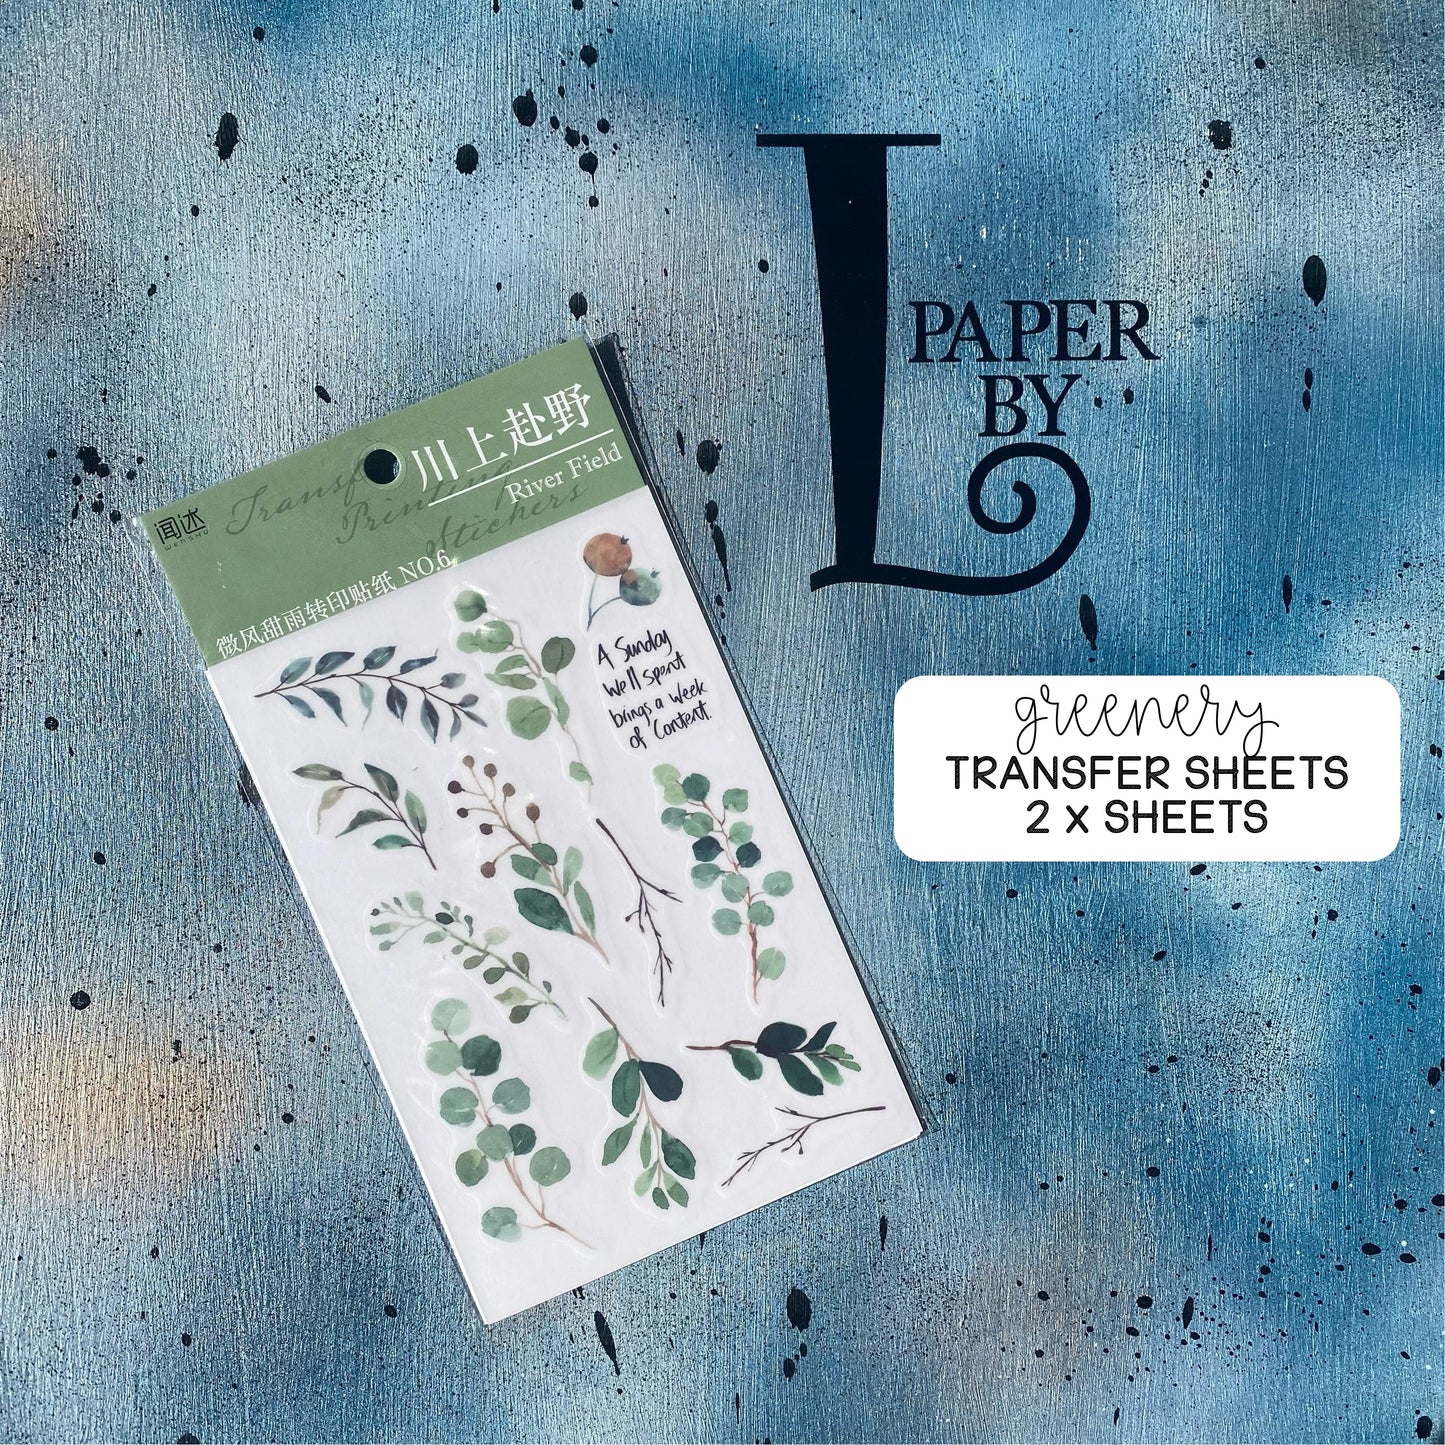 Transfer Sheets - Paper by L *